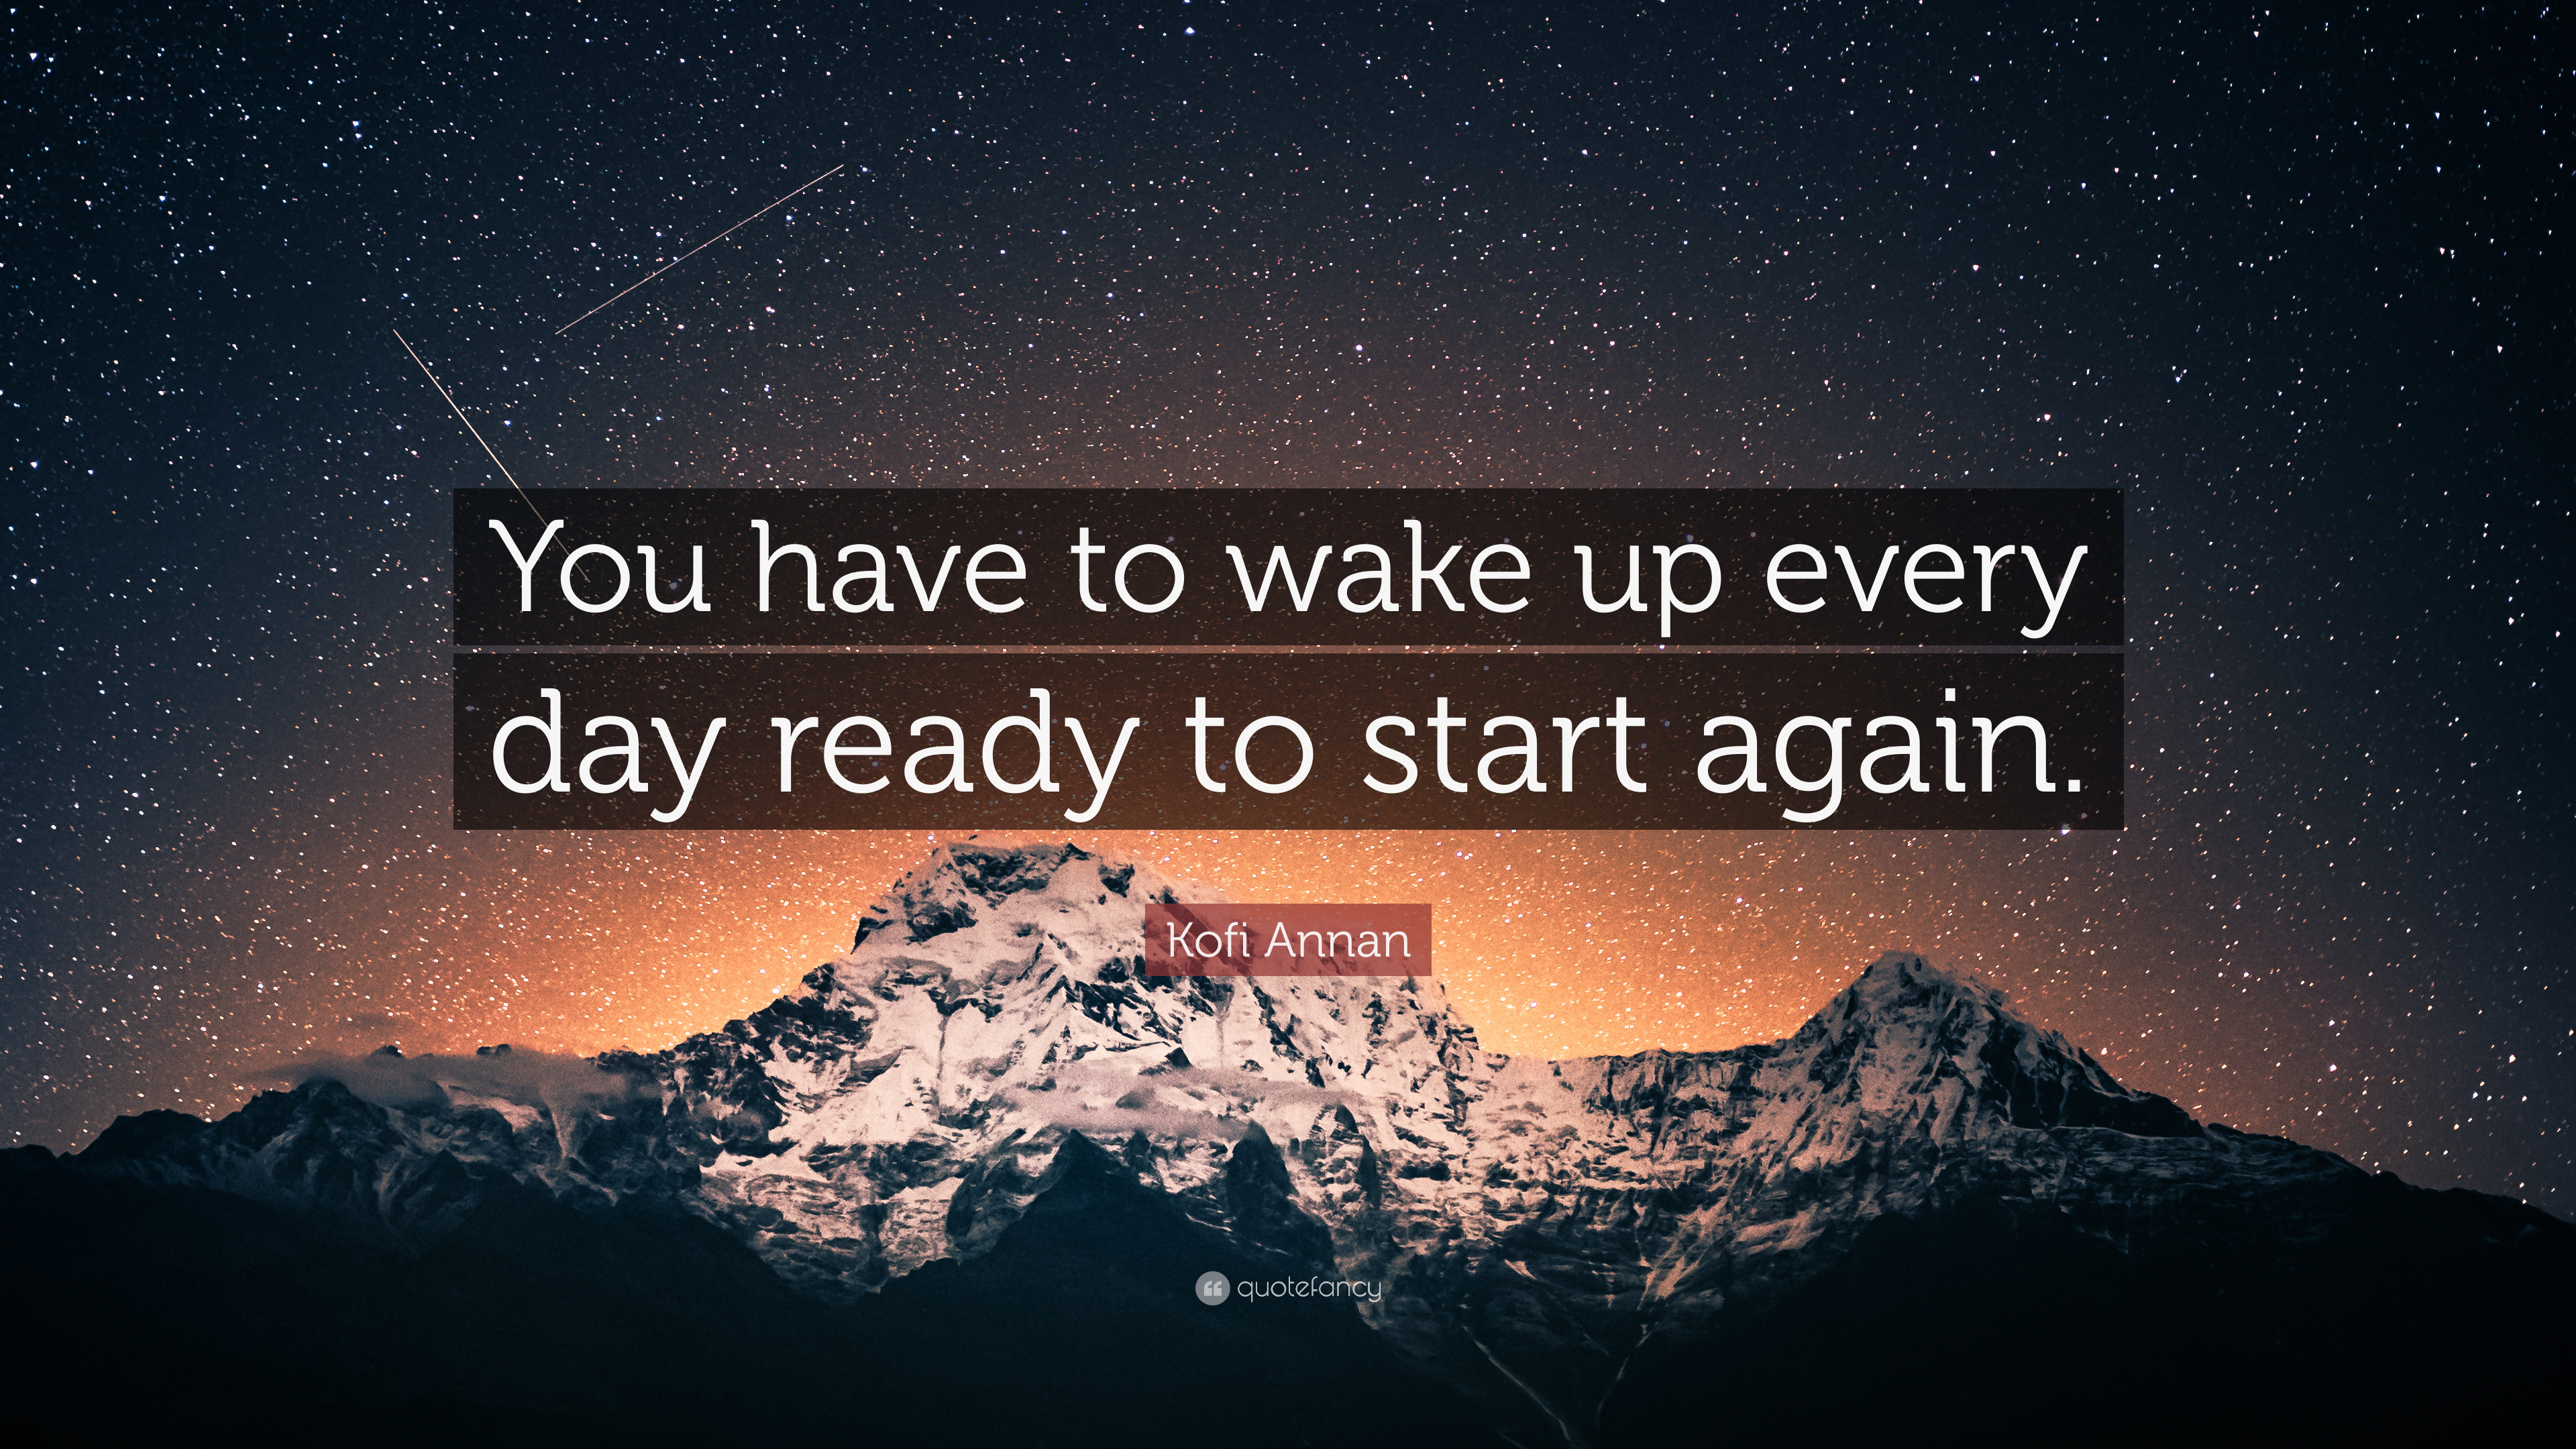 Kofi Annan Quote: “You have to wake up every day ready to start ...